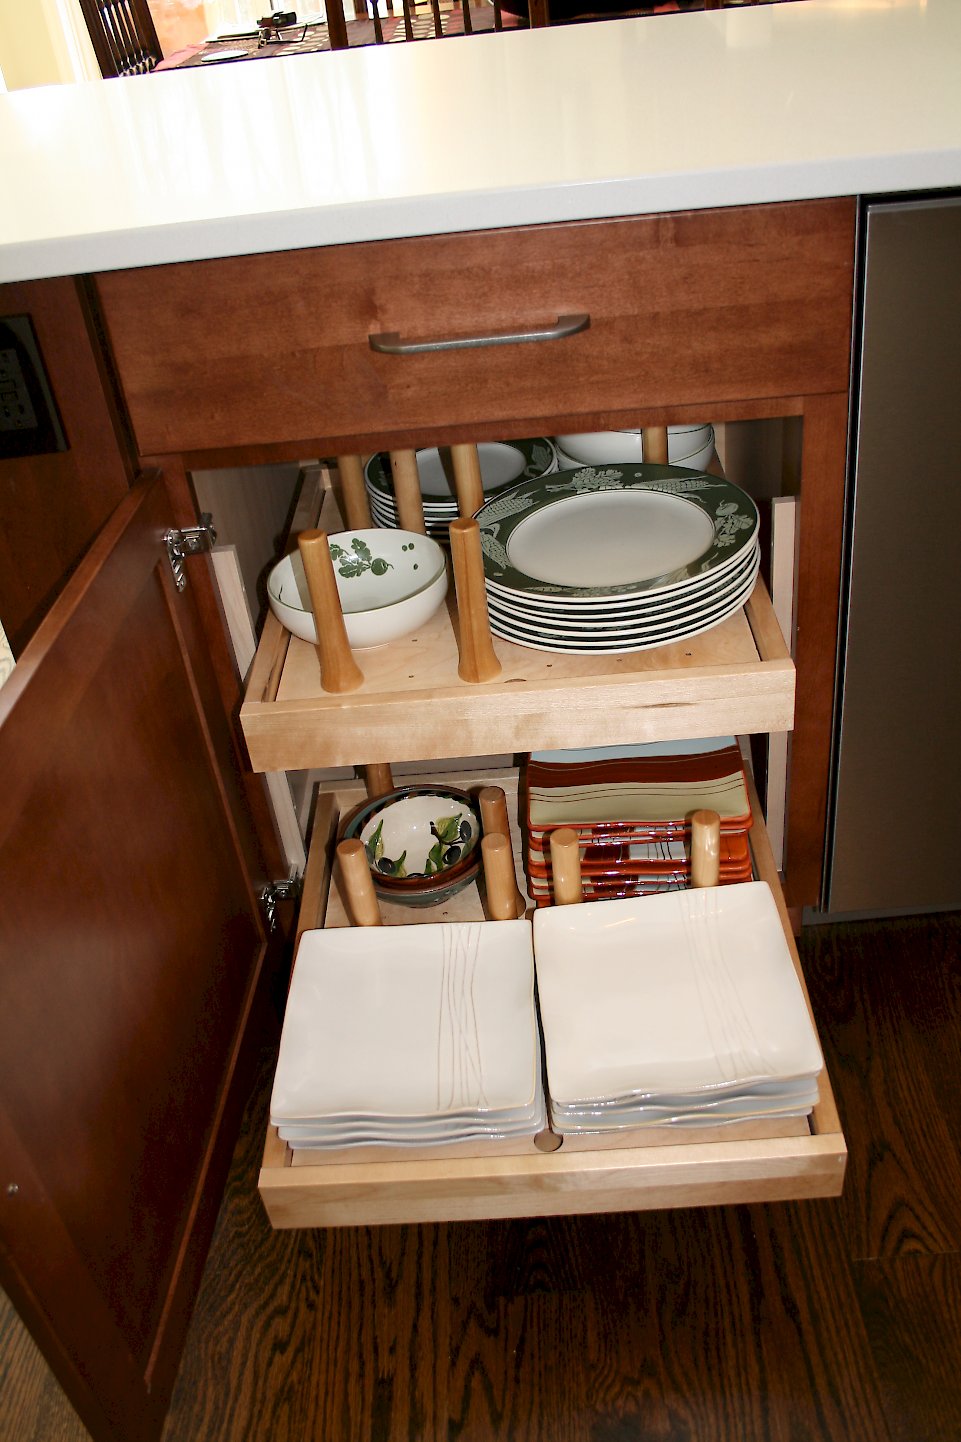 Pull out drawers with pegs to hold dishes.